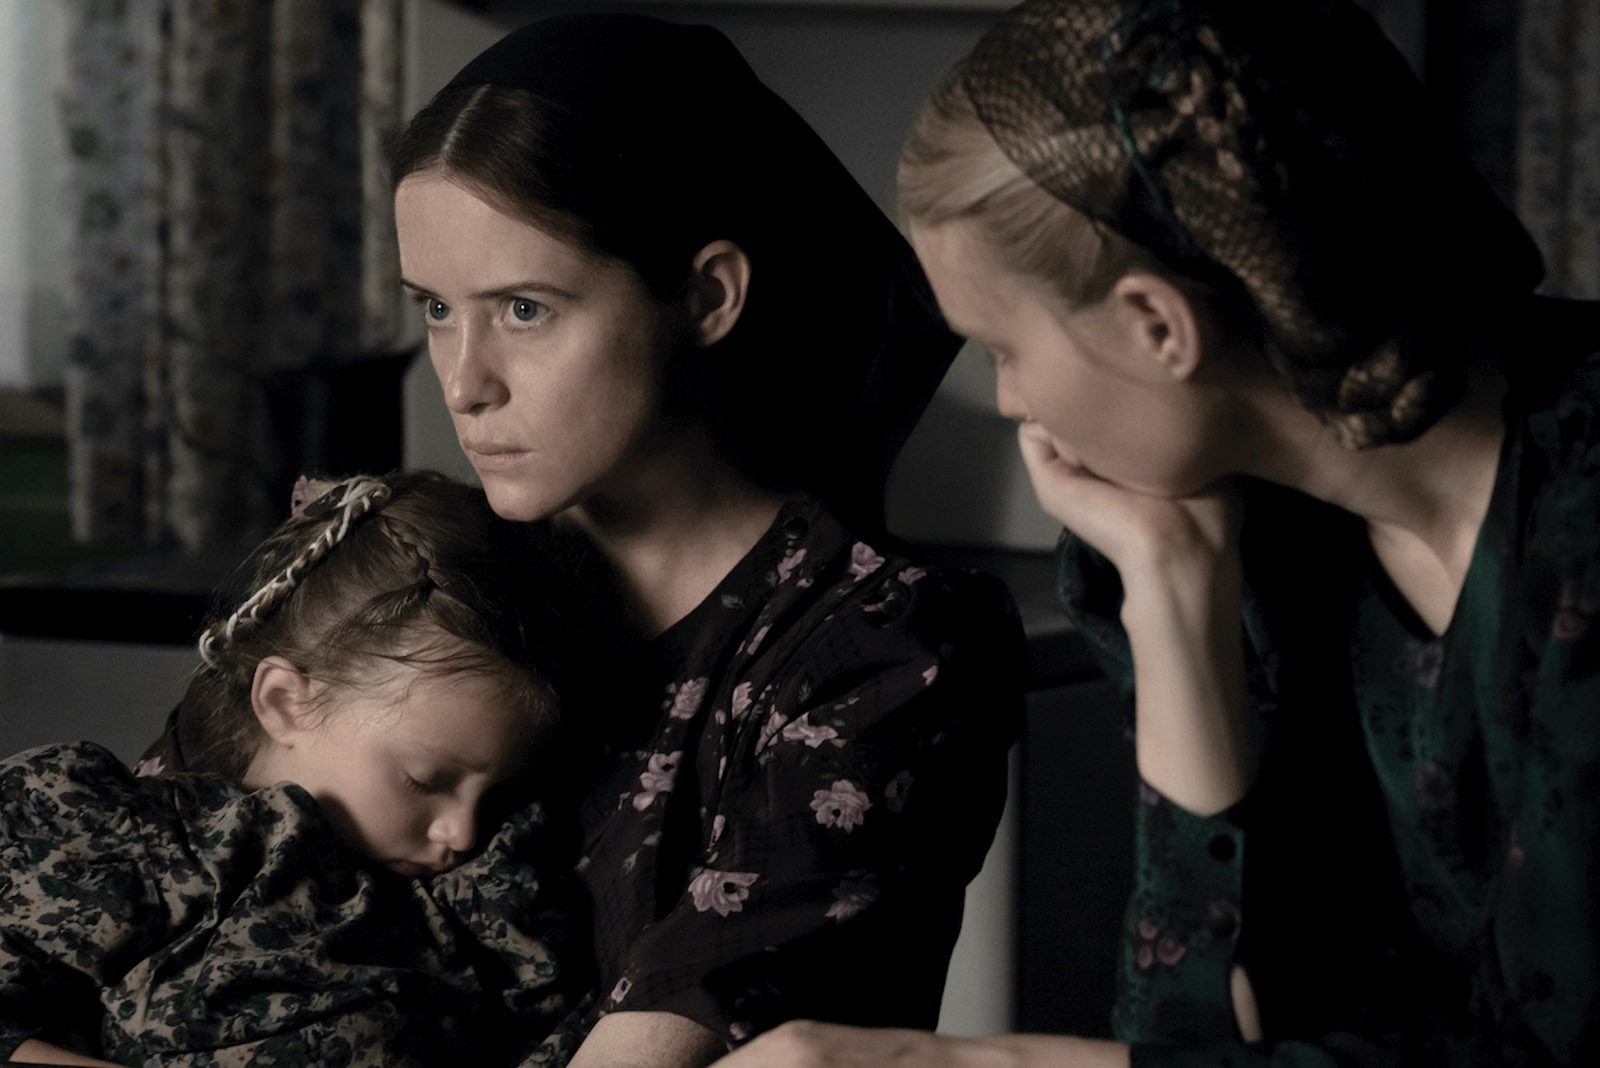 Emily Mitchell, Claire Foy, and Rooney Mara in Sarah Polley’s Women Talking